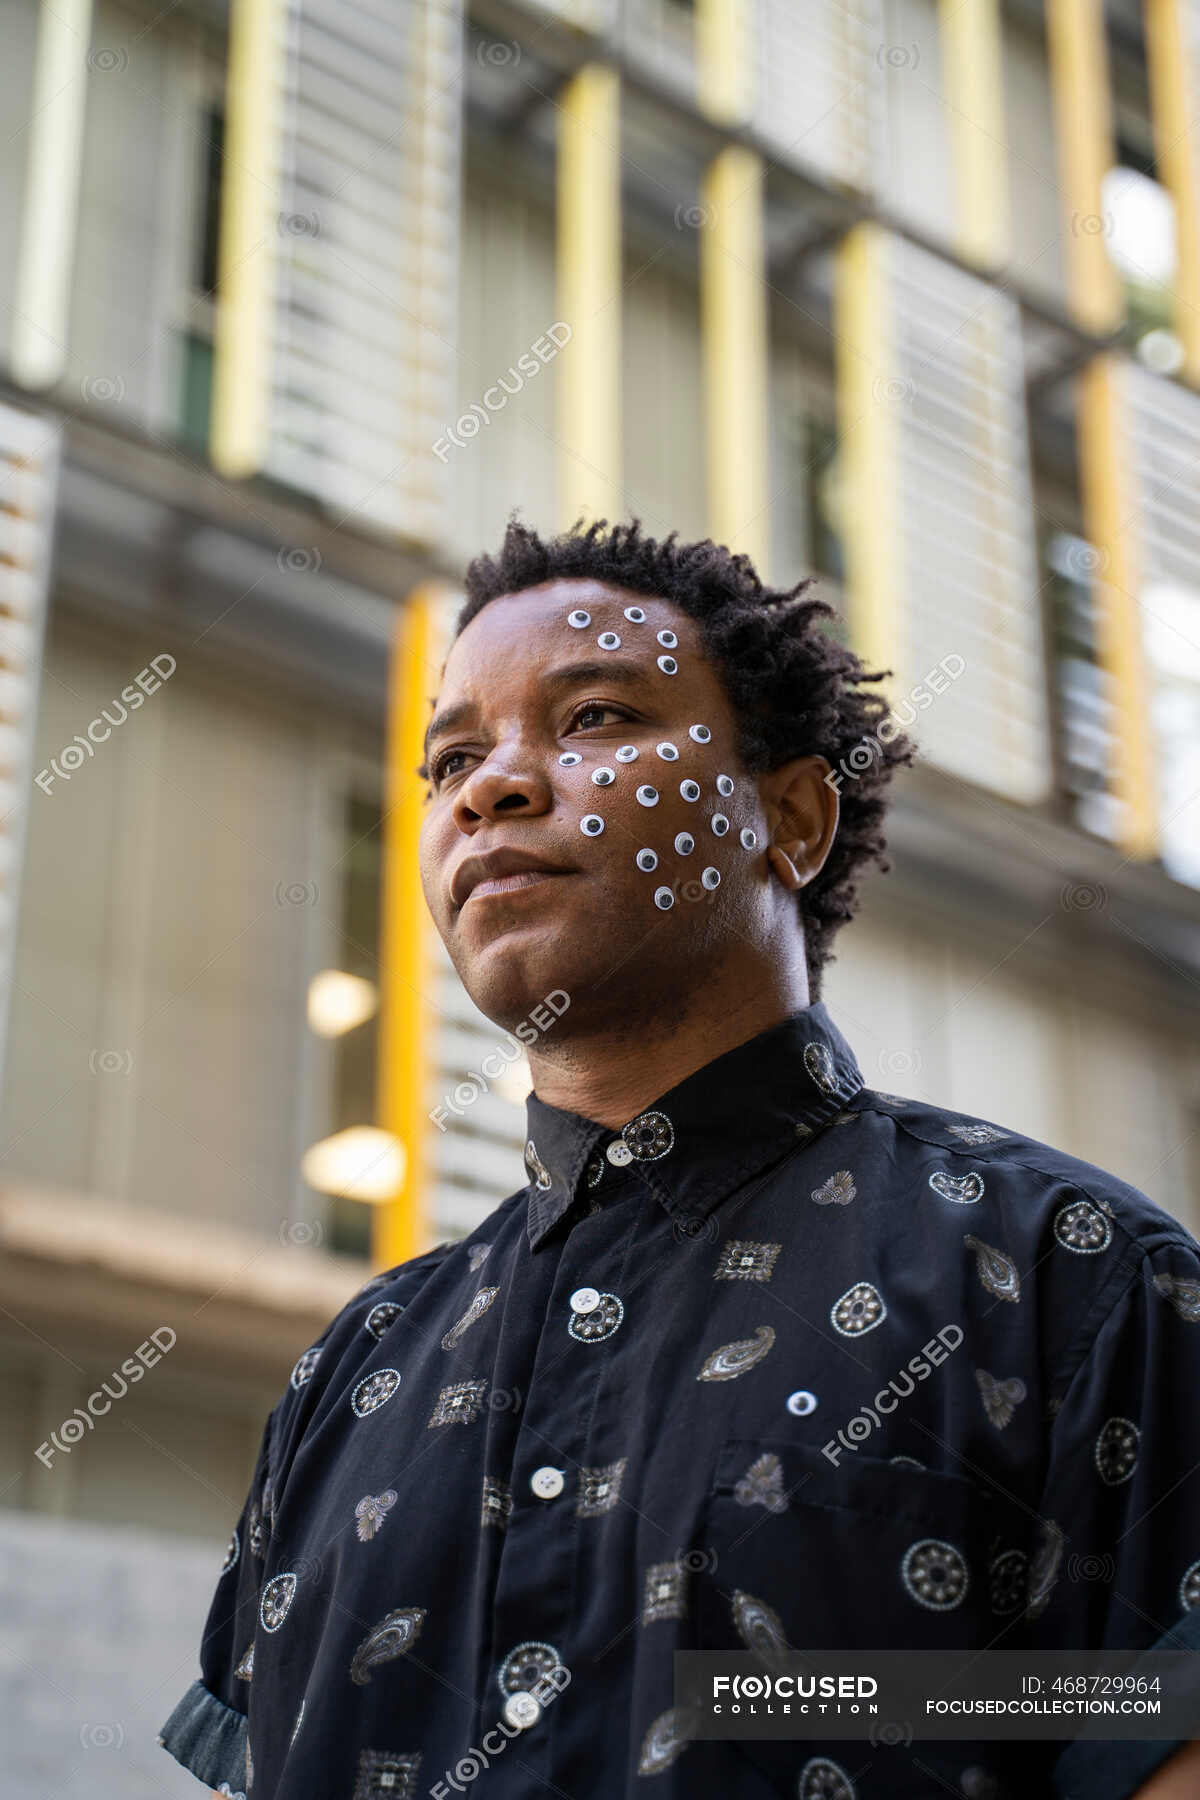 Man with wickly eyes on his face — black, people - Stock Photo | #468729964